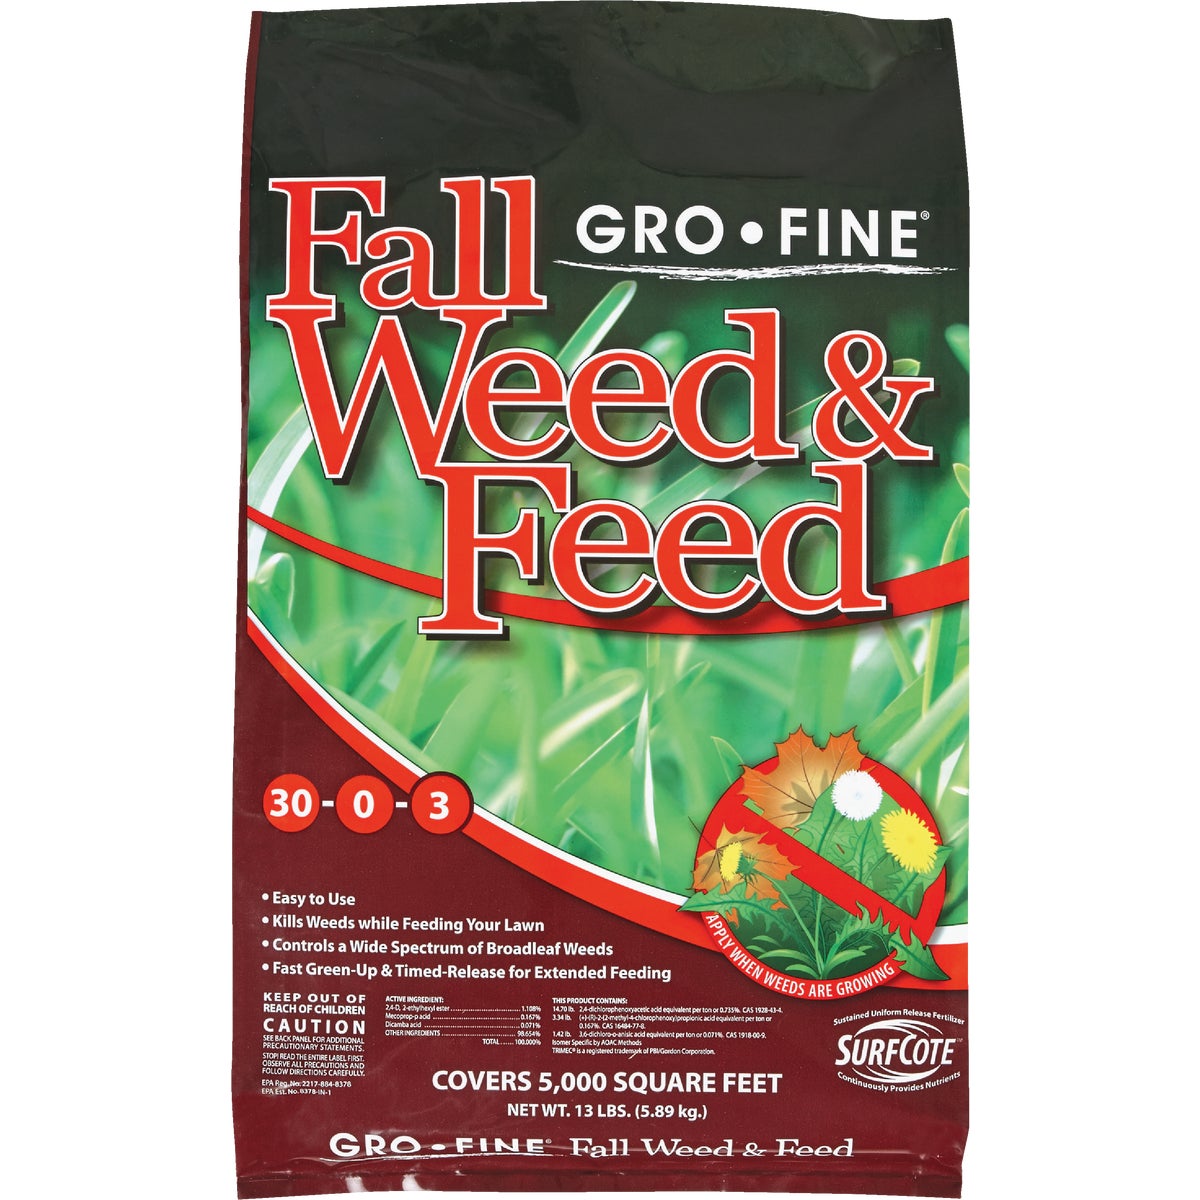 Item 765442, Fall weed &amp; feed, helps prepare lawns for winter.